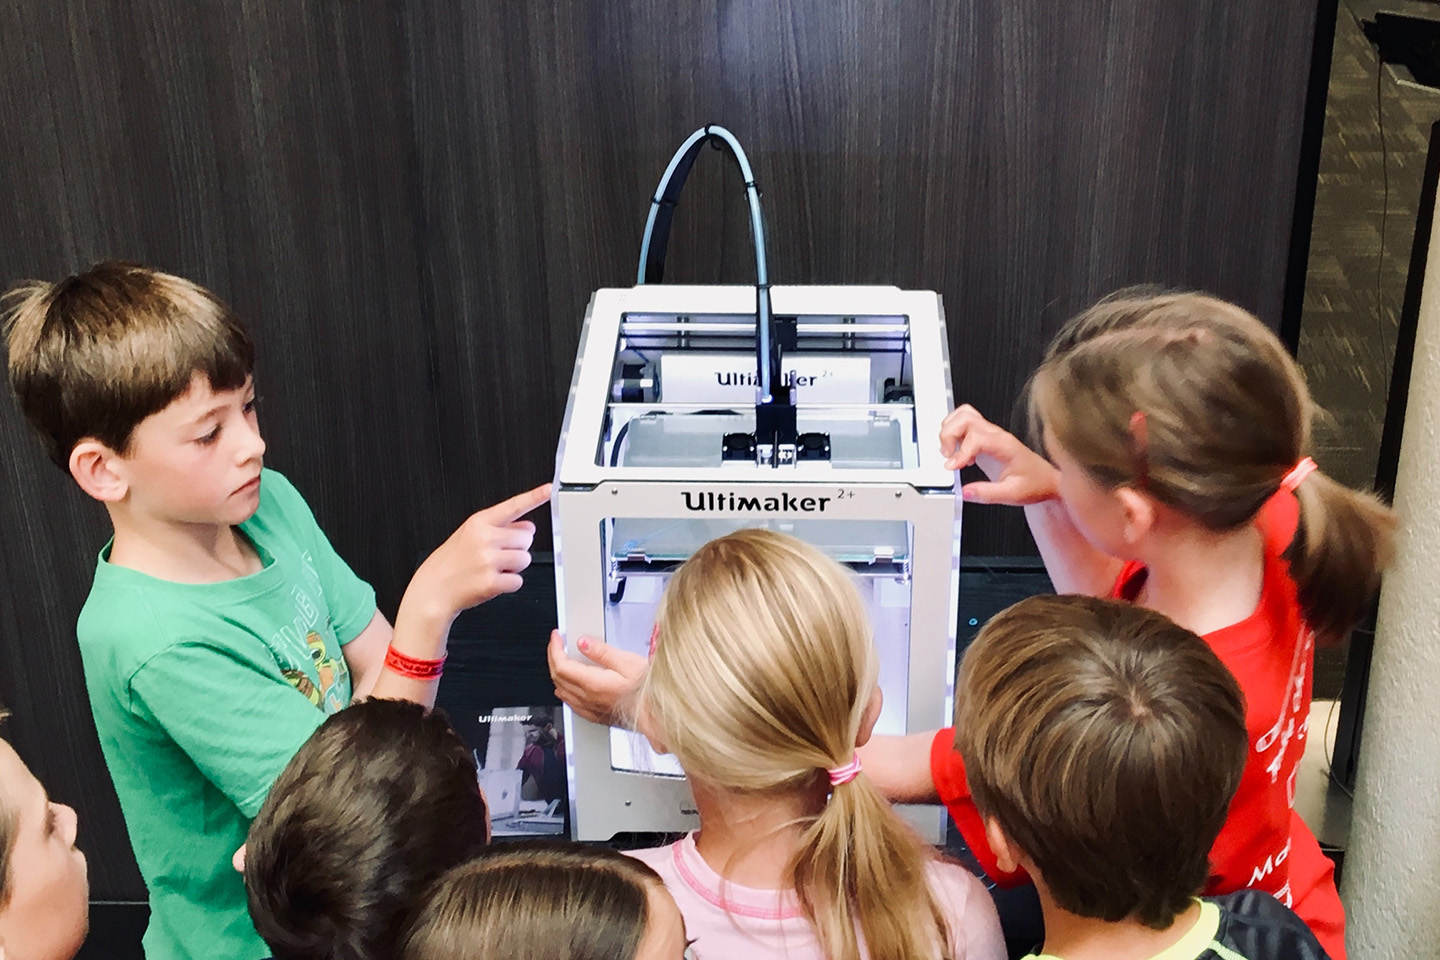 kids looking at a white 3d printer